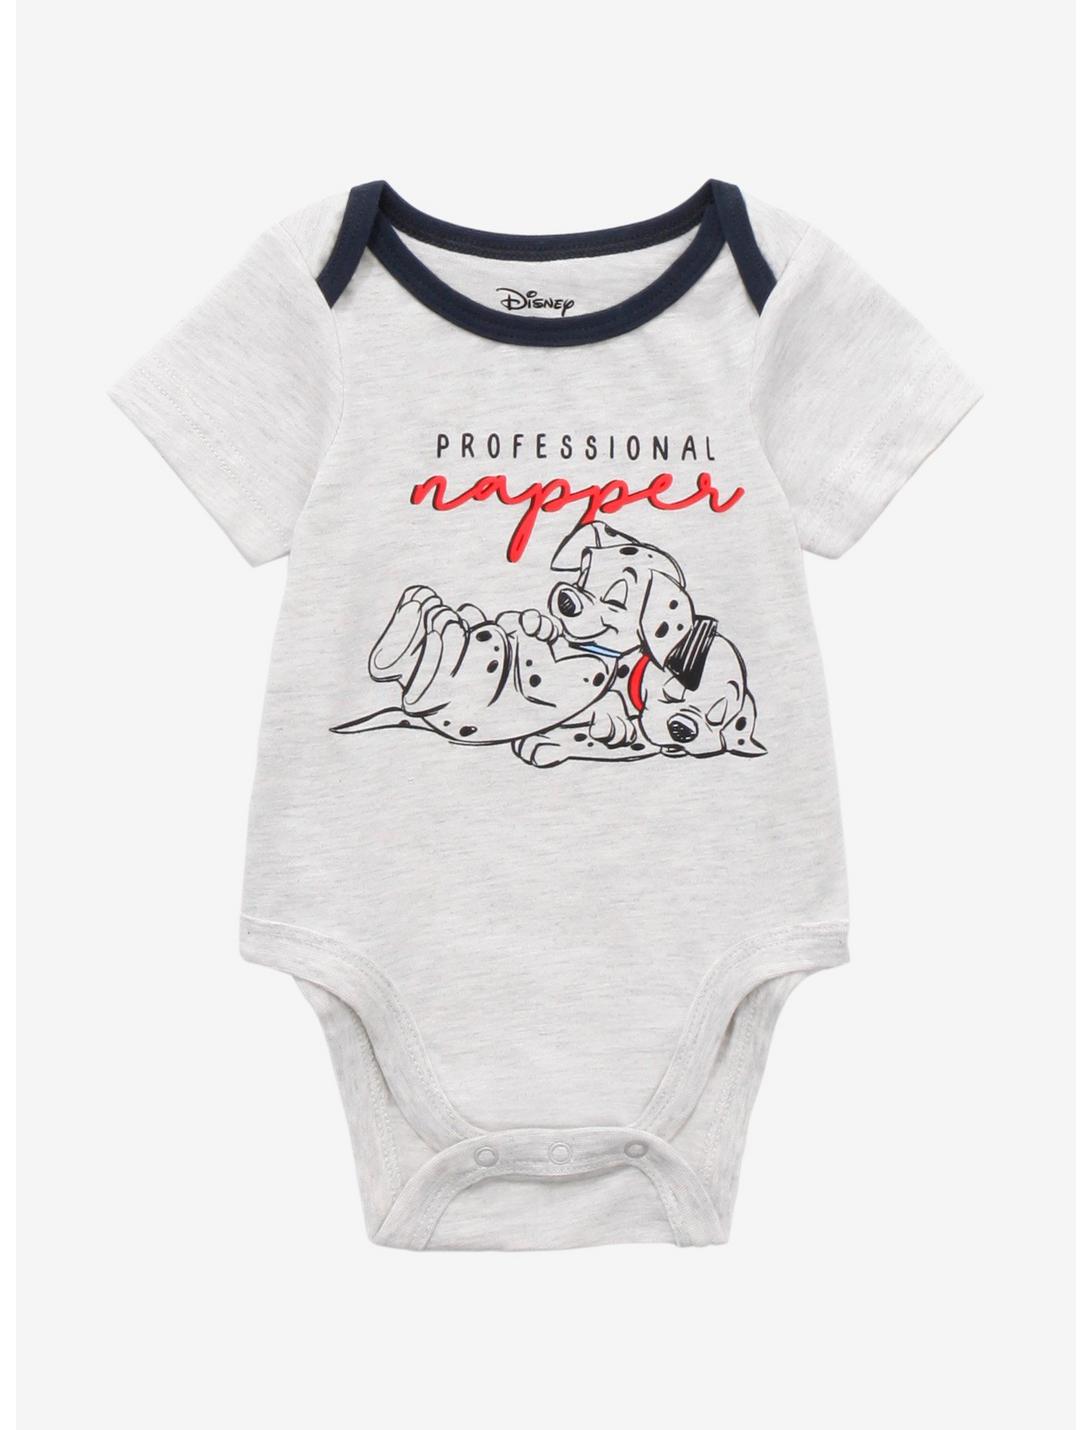 Disney 101 Dalmatians Professional Napper Infant One-Piece - BoxLunch Exclusive, RED, hi-res